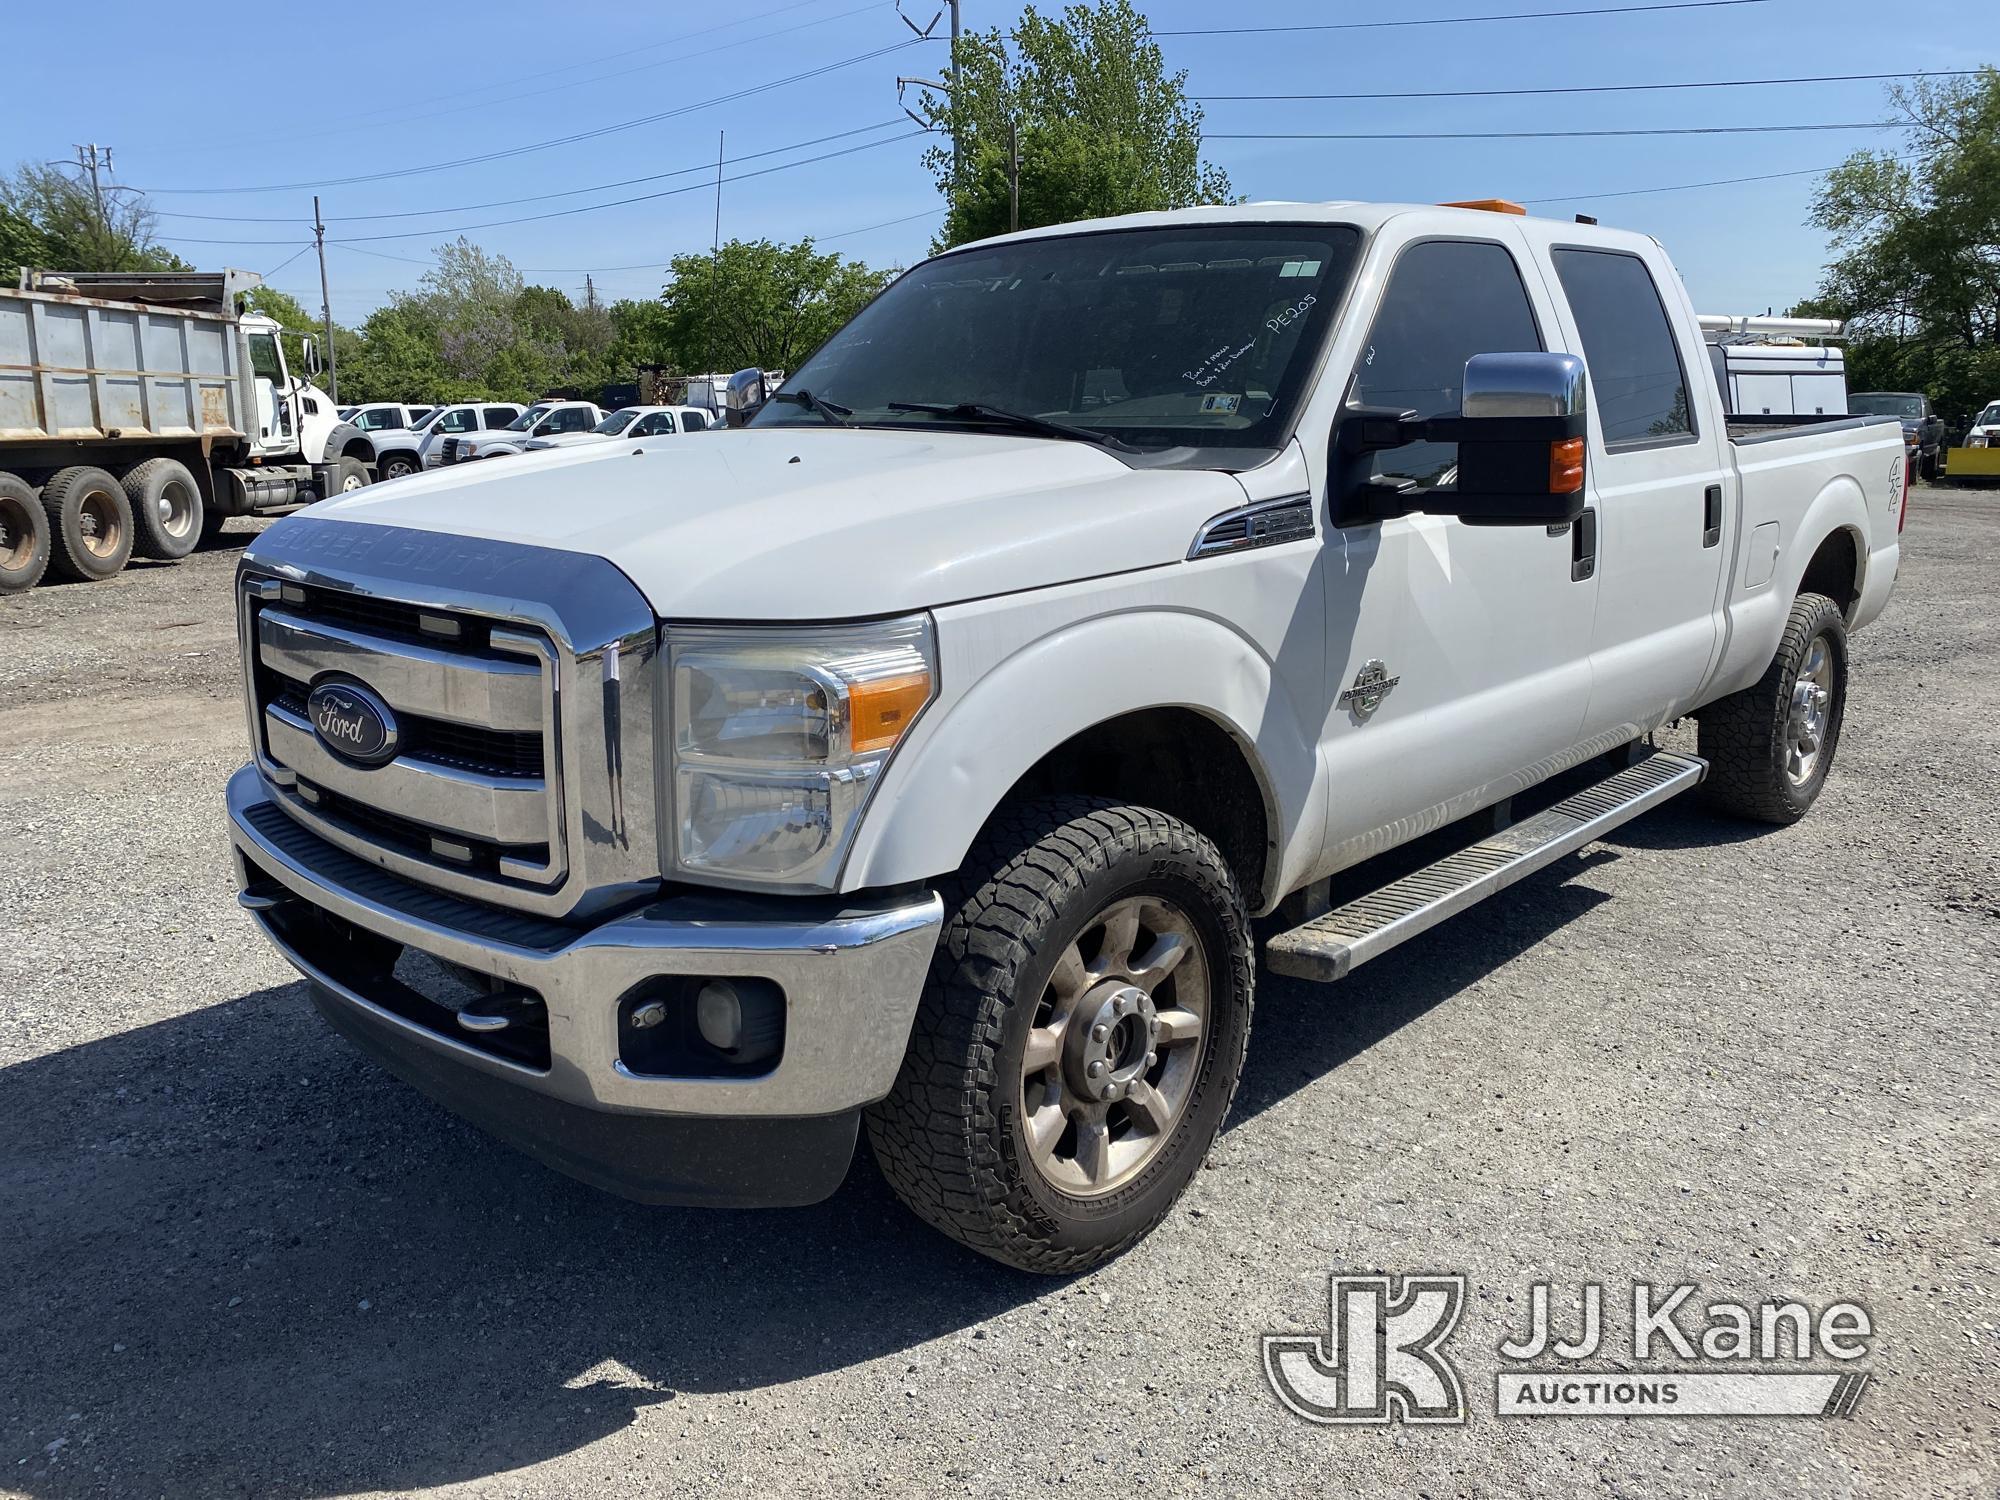 (Plymouth Meeting, PA) 2013 Ford F250 4x4 Crew-Cab Pickup Truck Runs & Moves, Body & Rust Damage